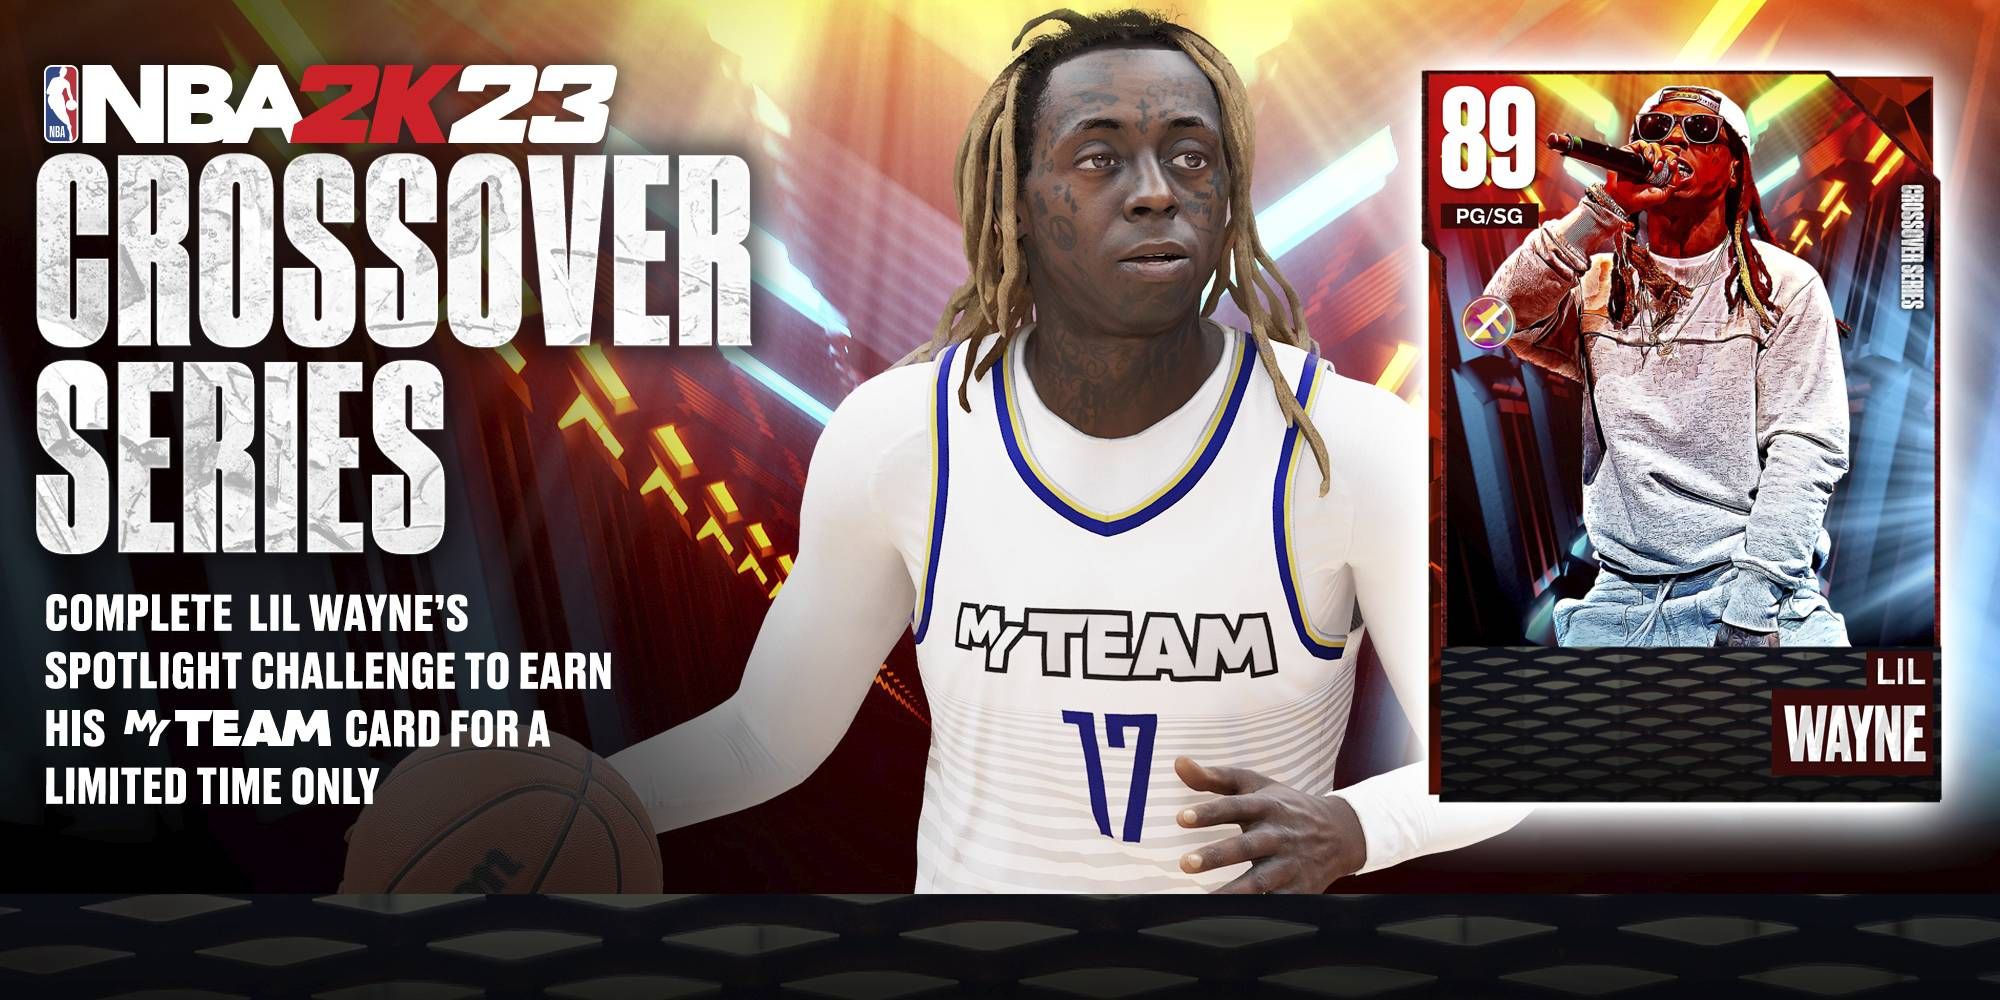 NBA 2K23 Crossover Series with Lil Wayne as Playable Athlete, with Ruby Card Unlocked through Special Challenge